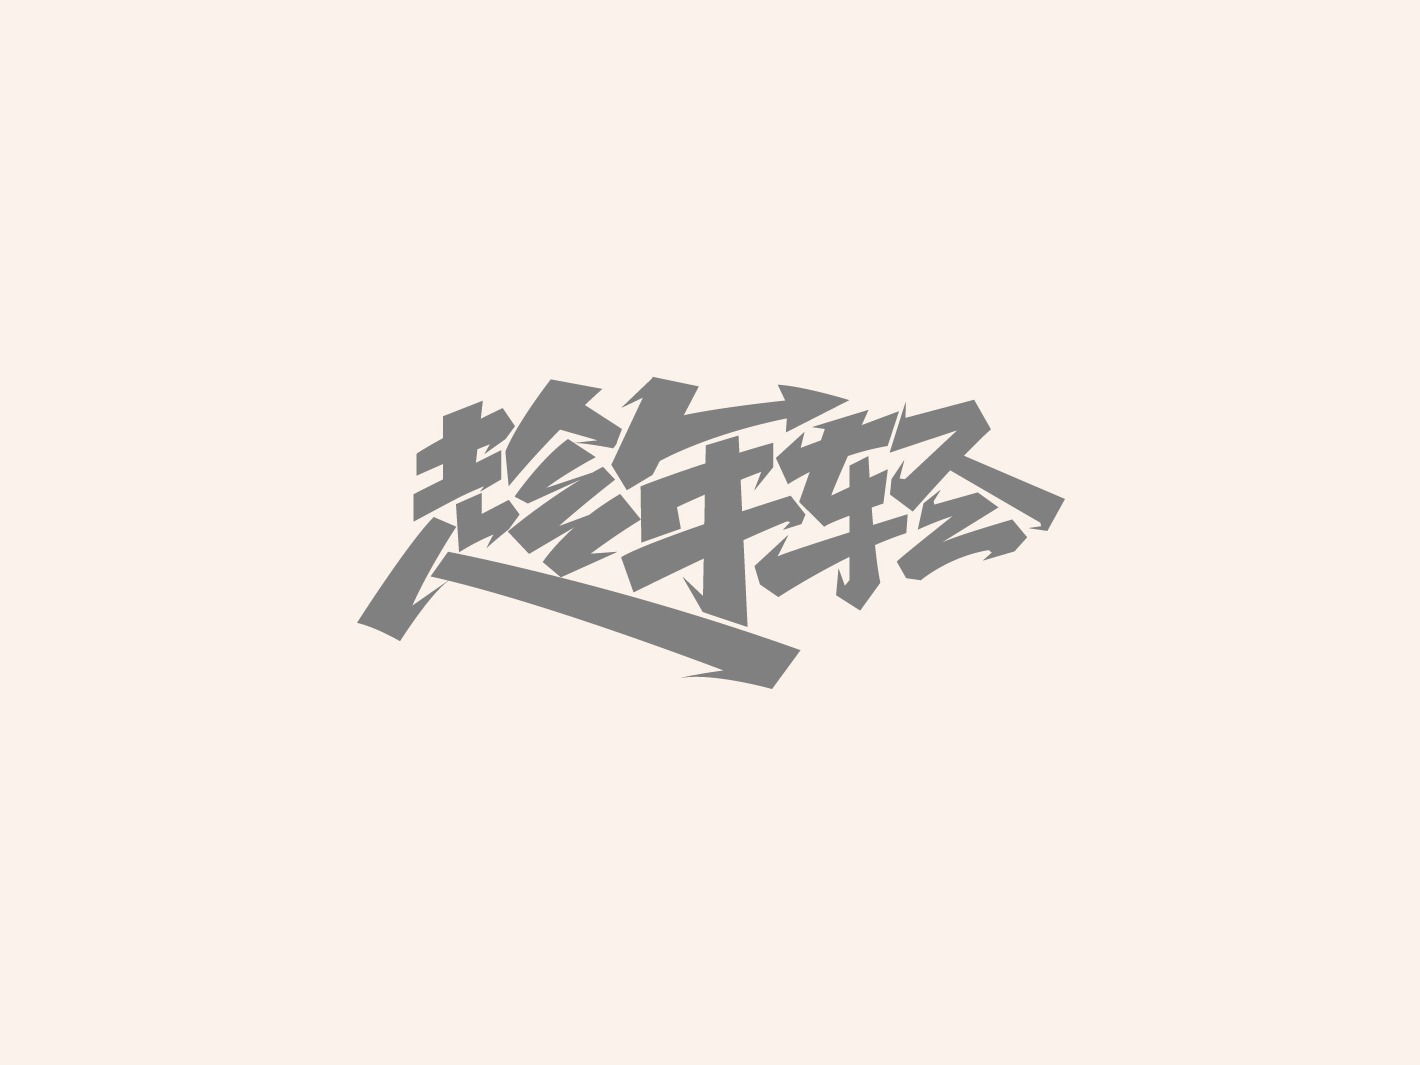 Interesting Chinese Creative Font Design-Break with the conventional font design